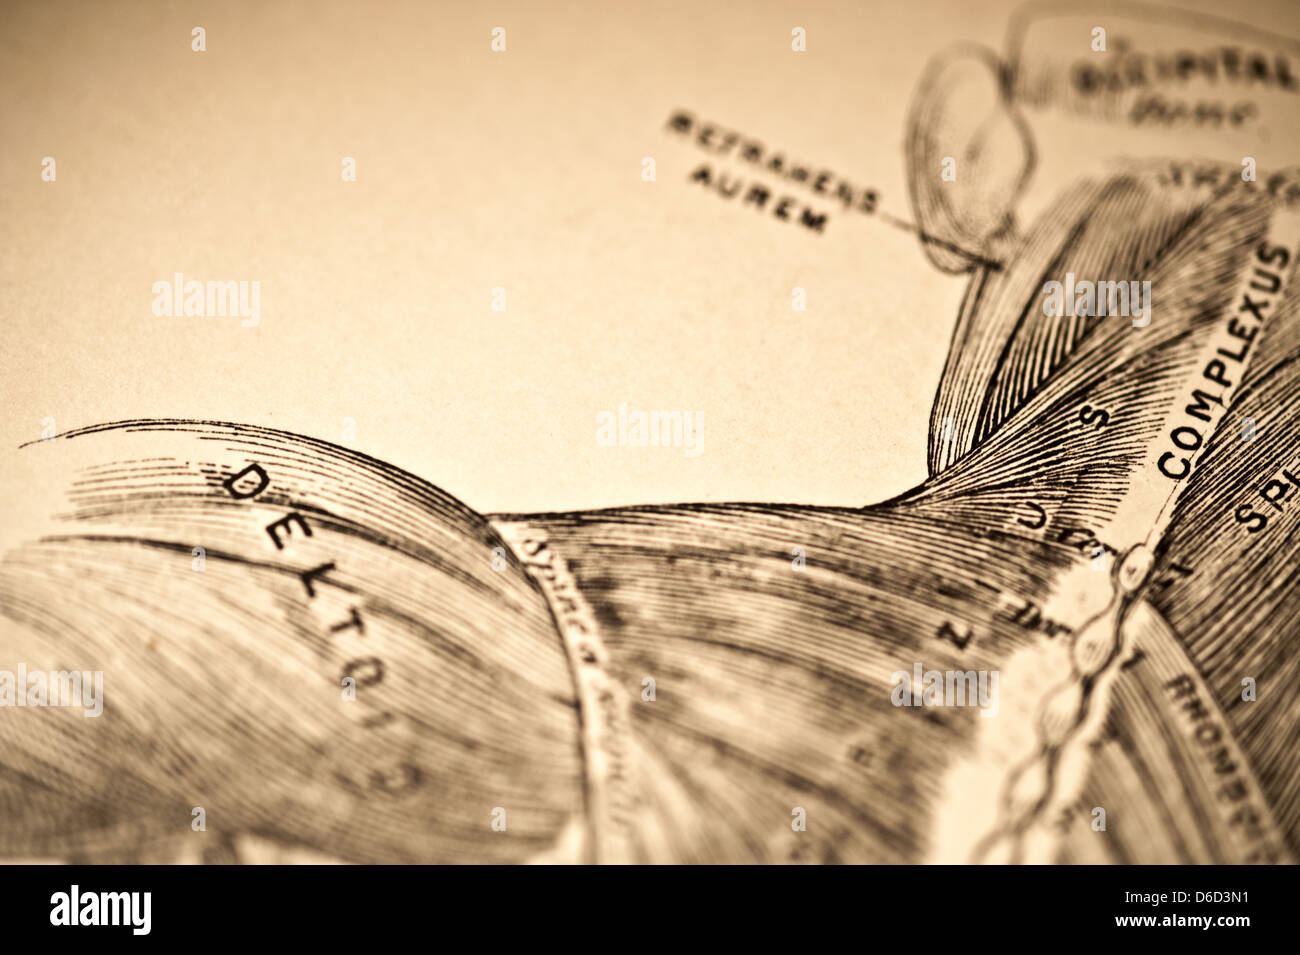 Antique illustration showing the muscles of the neck & shoulder. Stock Photo